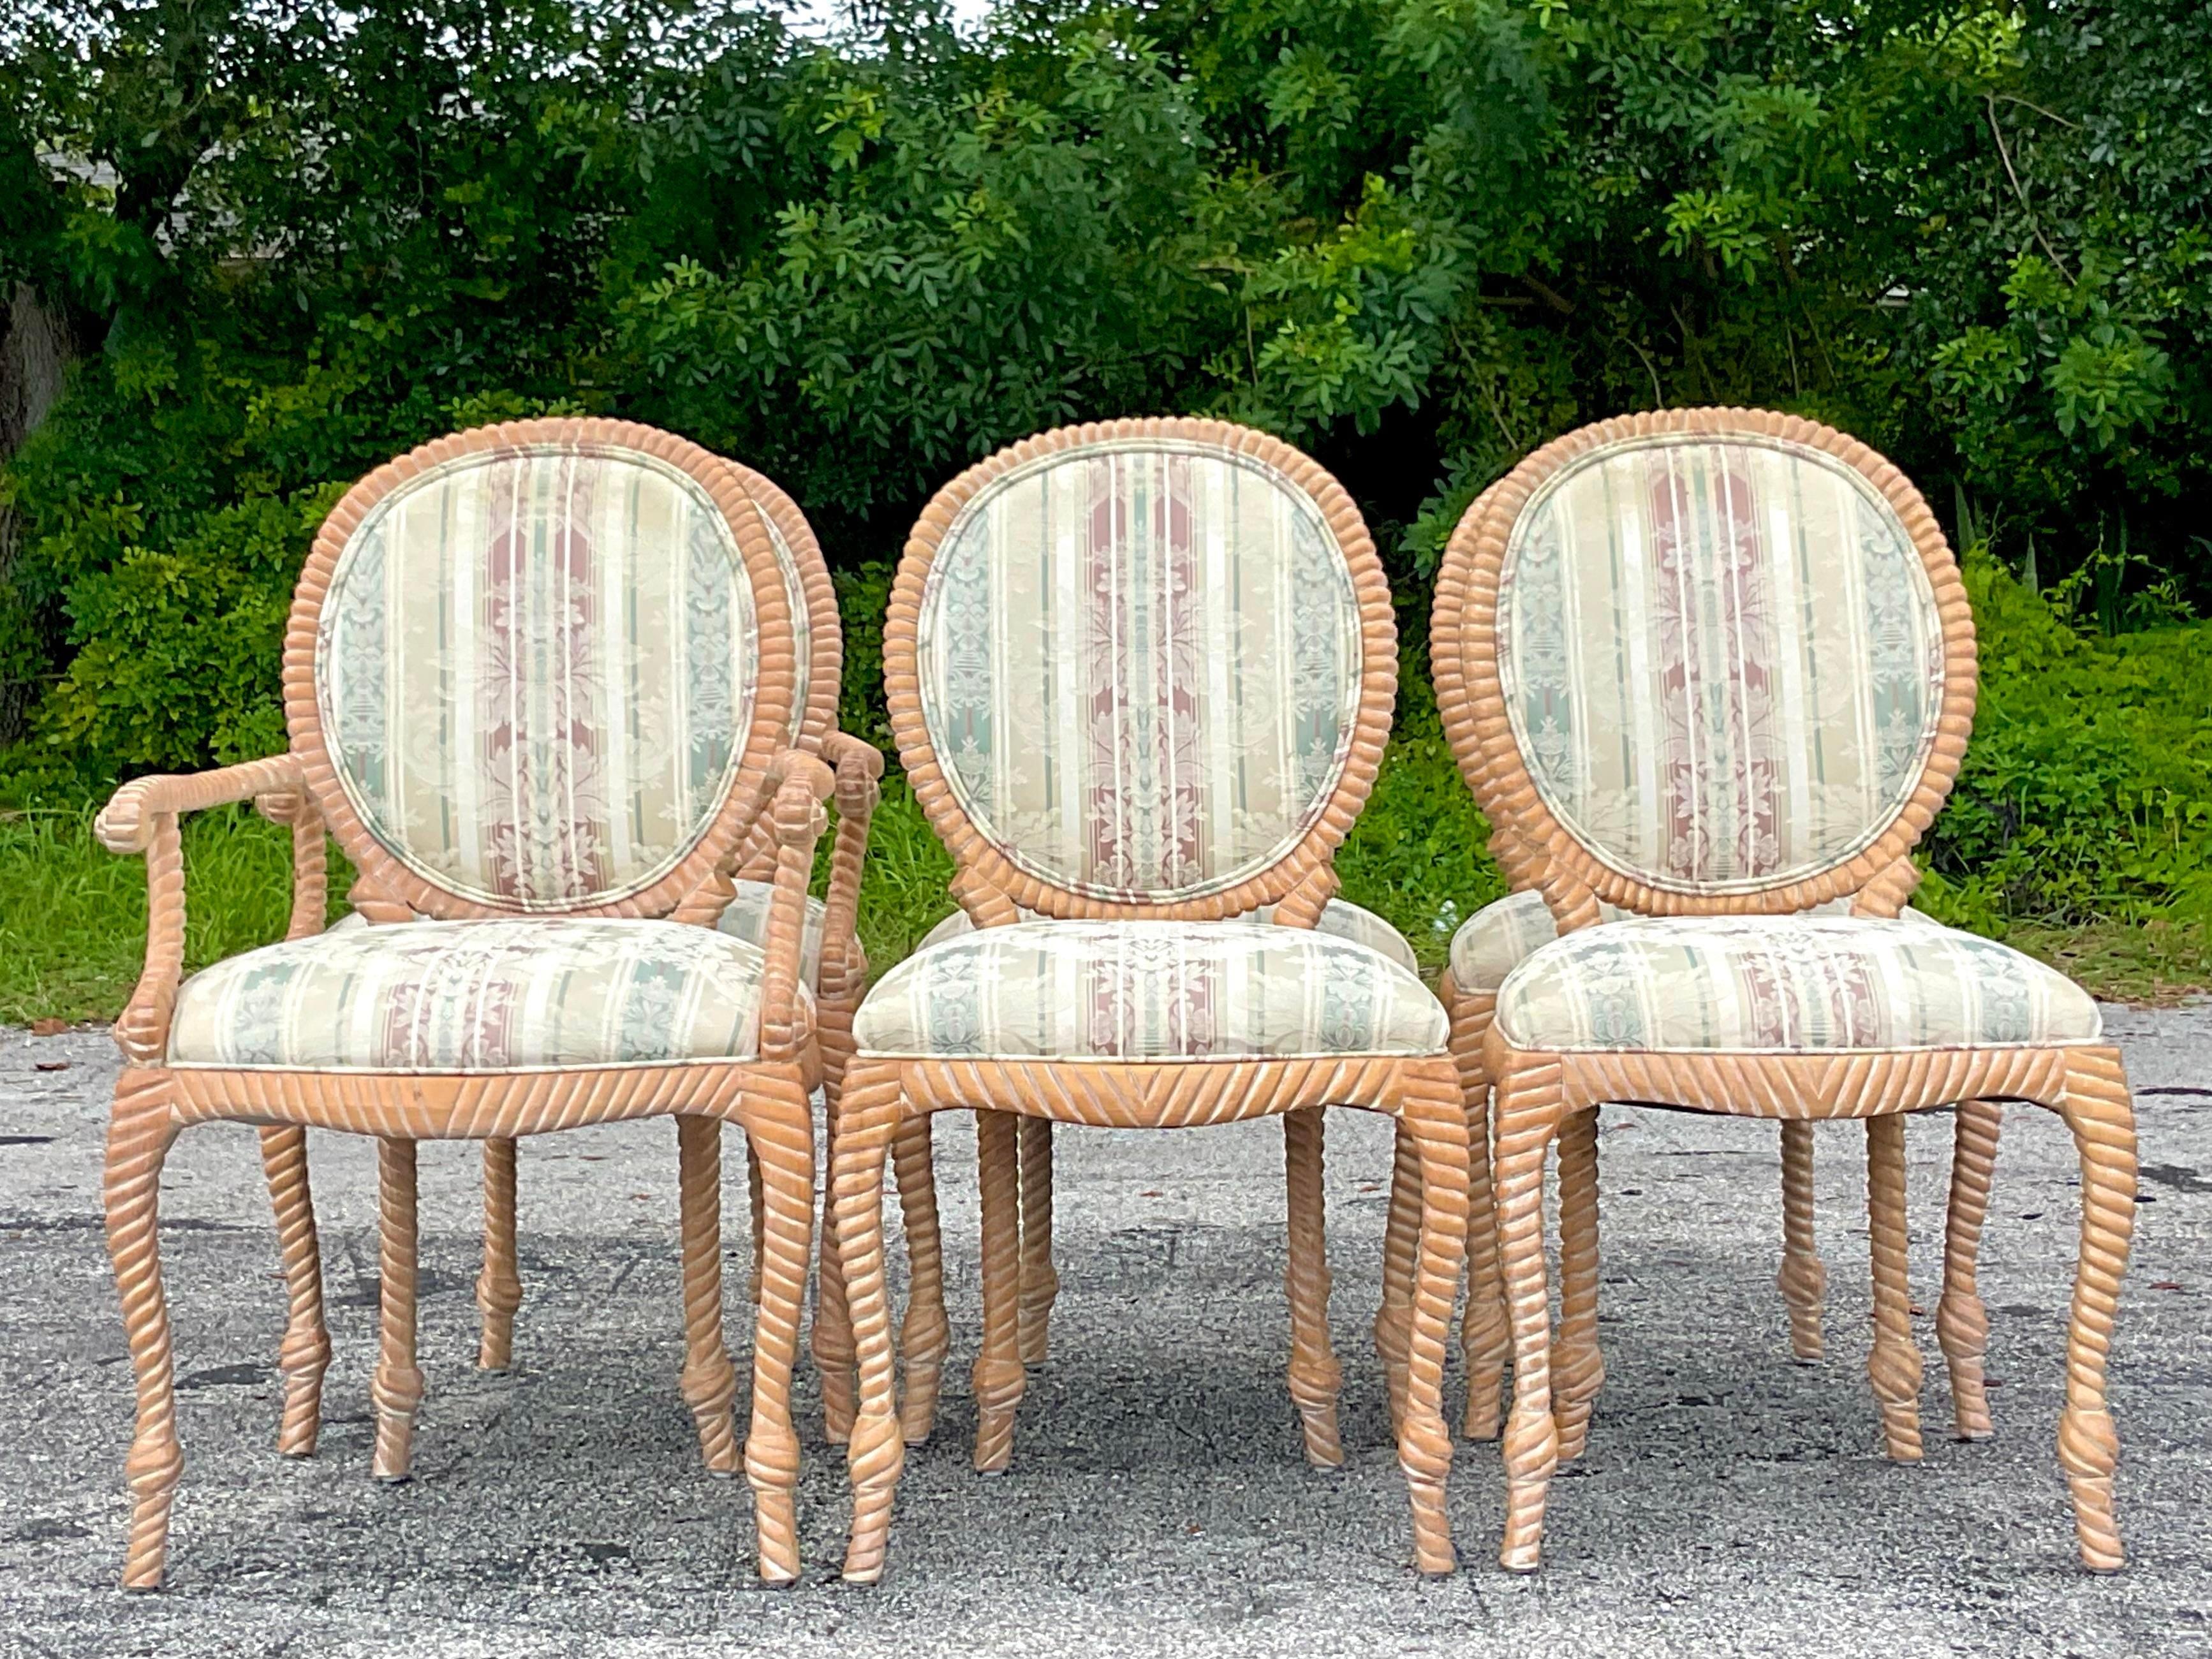 A fabulous set of 6 vintage Boho dining chairs. Beautiful carved wood design in a pale wood. Two arm chairs and four sides. Acquired from a Palm Beach estate.

Arm chairs 24 wide.